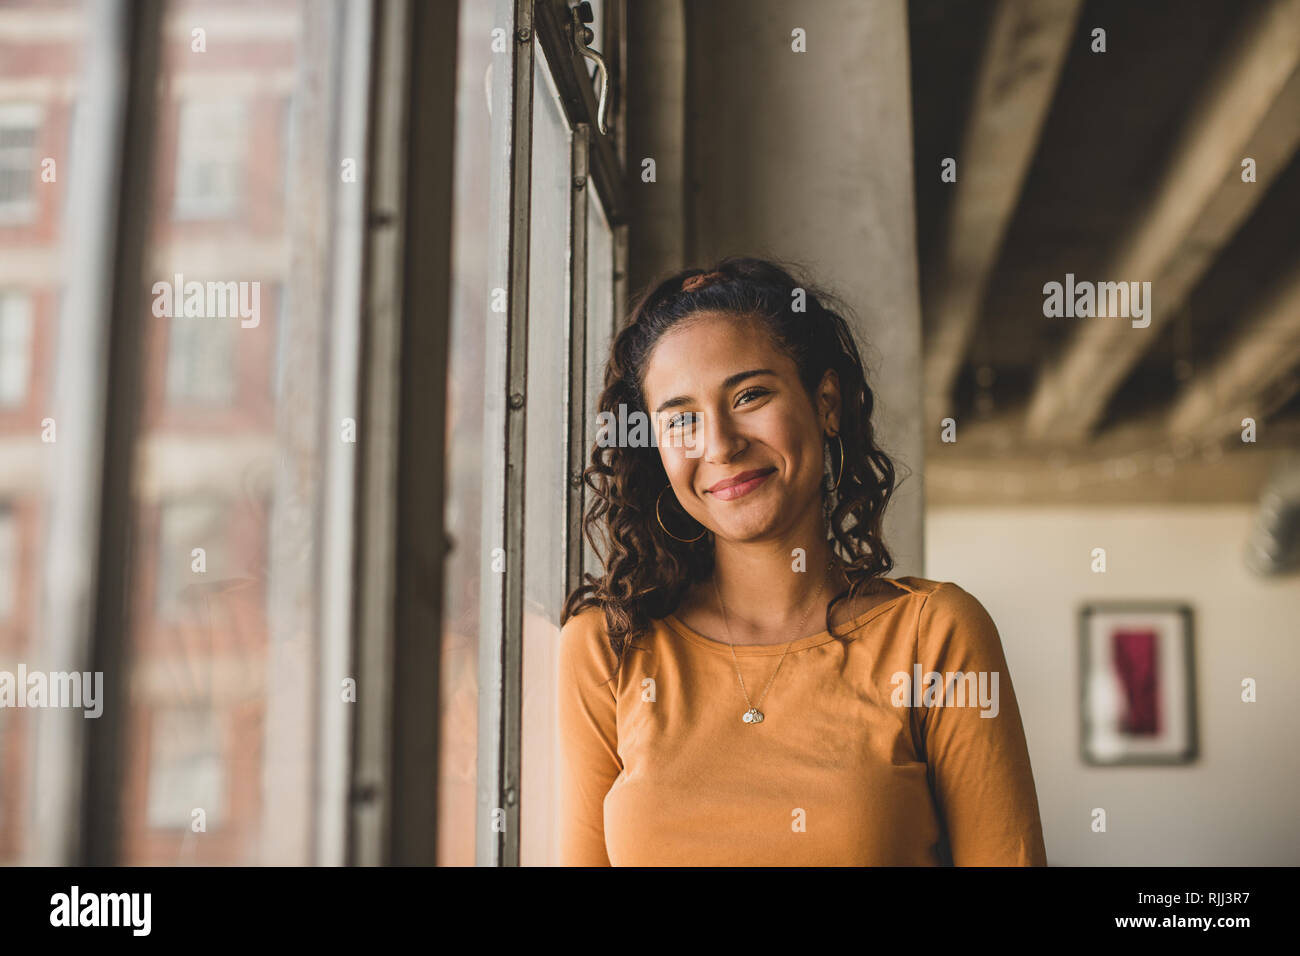 Portrait of young hispanic female looking to camera Stock Photo